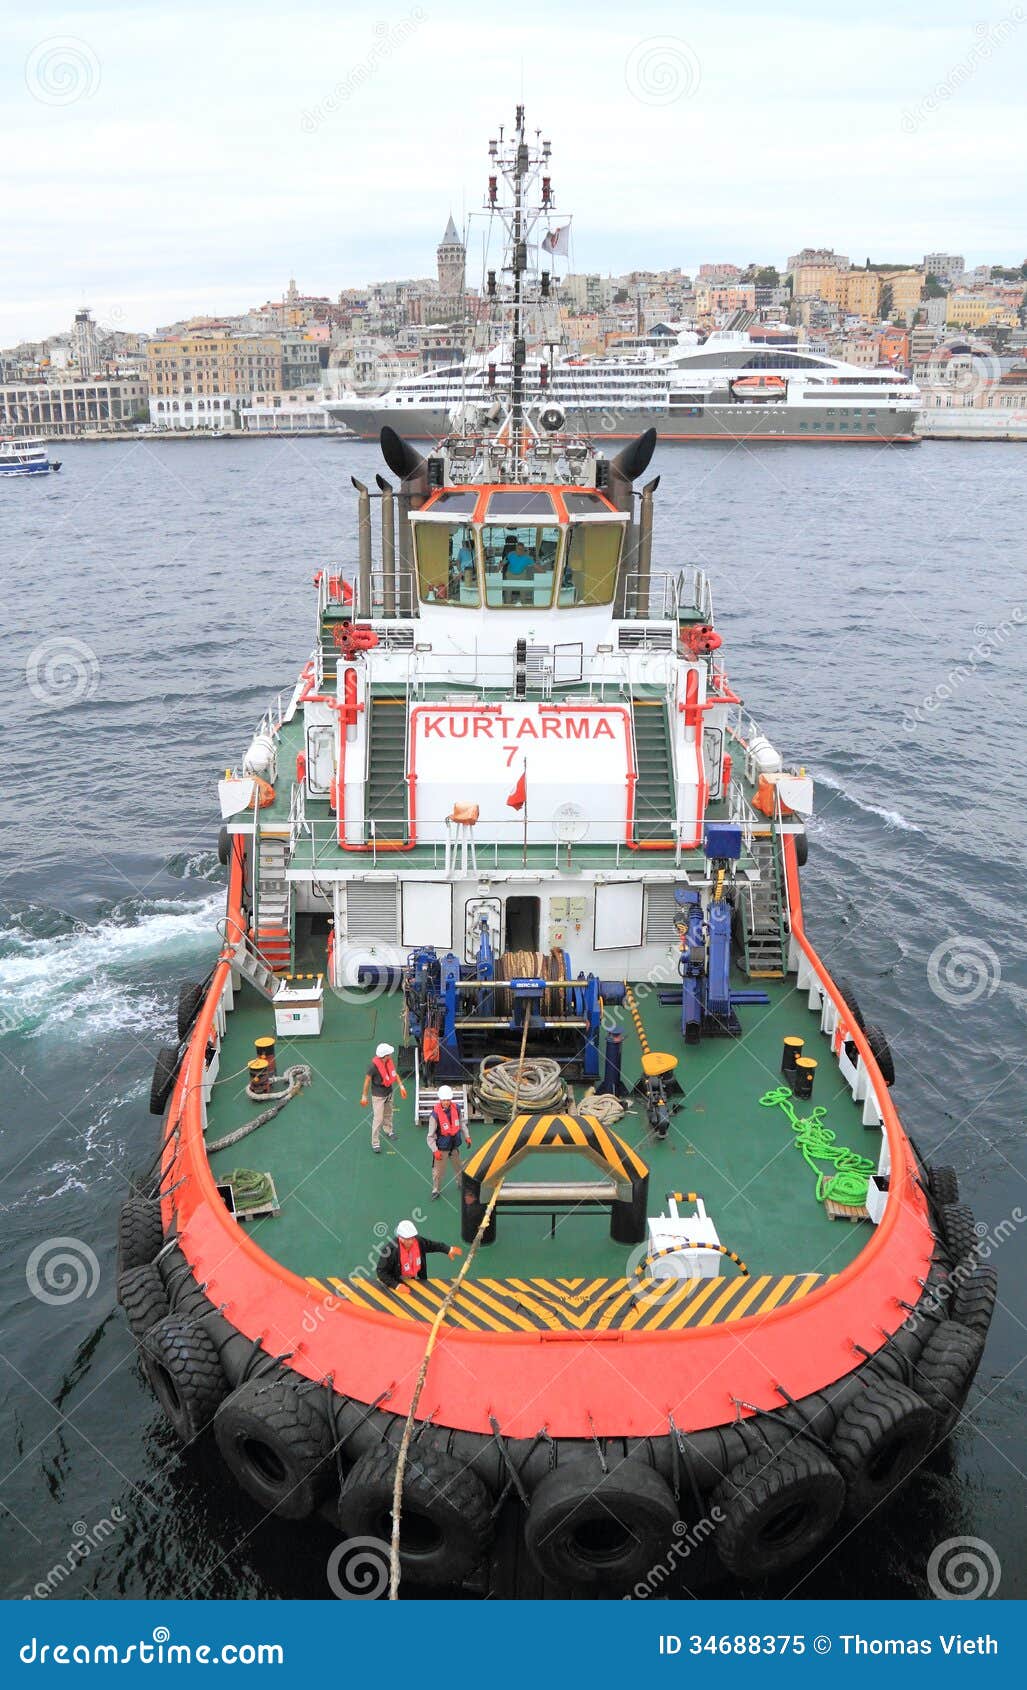  - tugboat-istanbul-harbor-pulling-cruise-ship-crowded-passenger-open-waters-famous-galata-tower-34688375